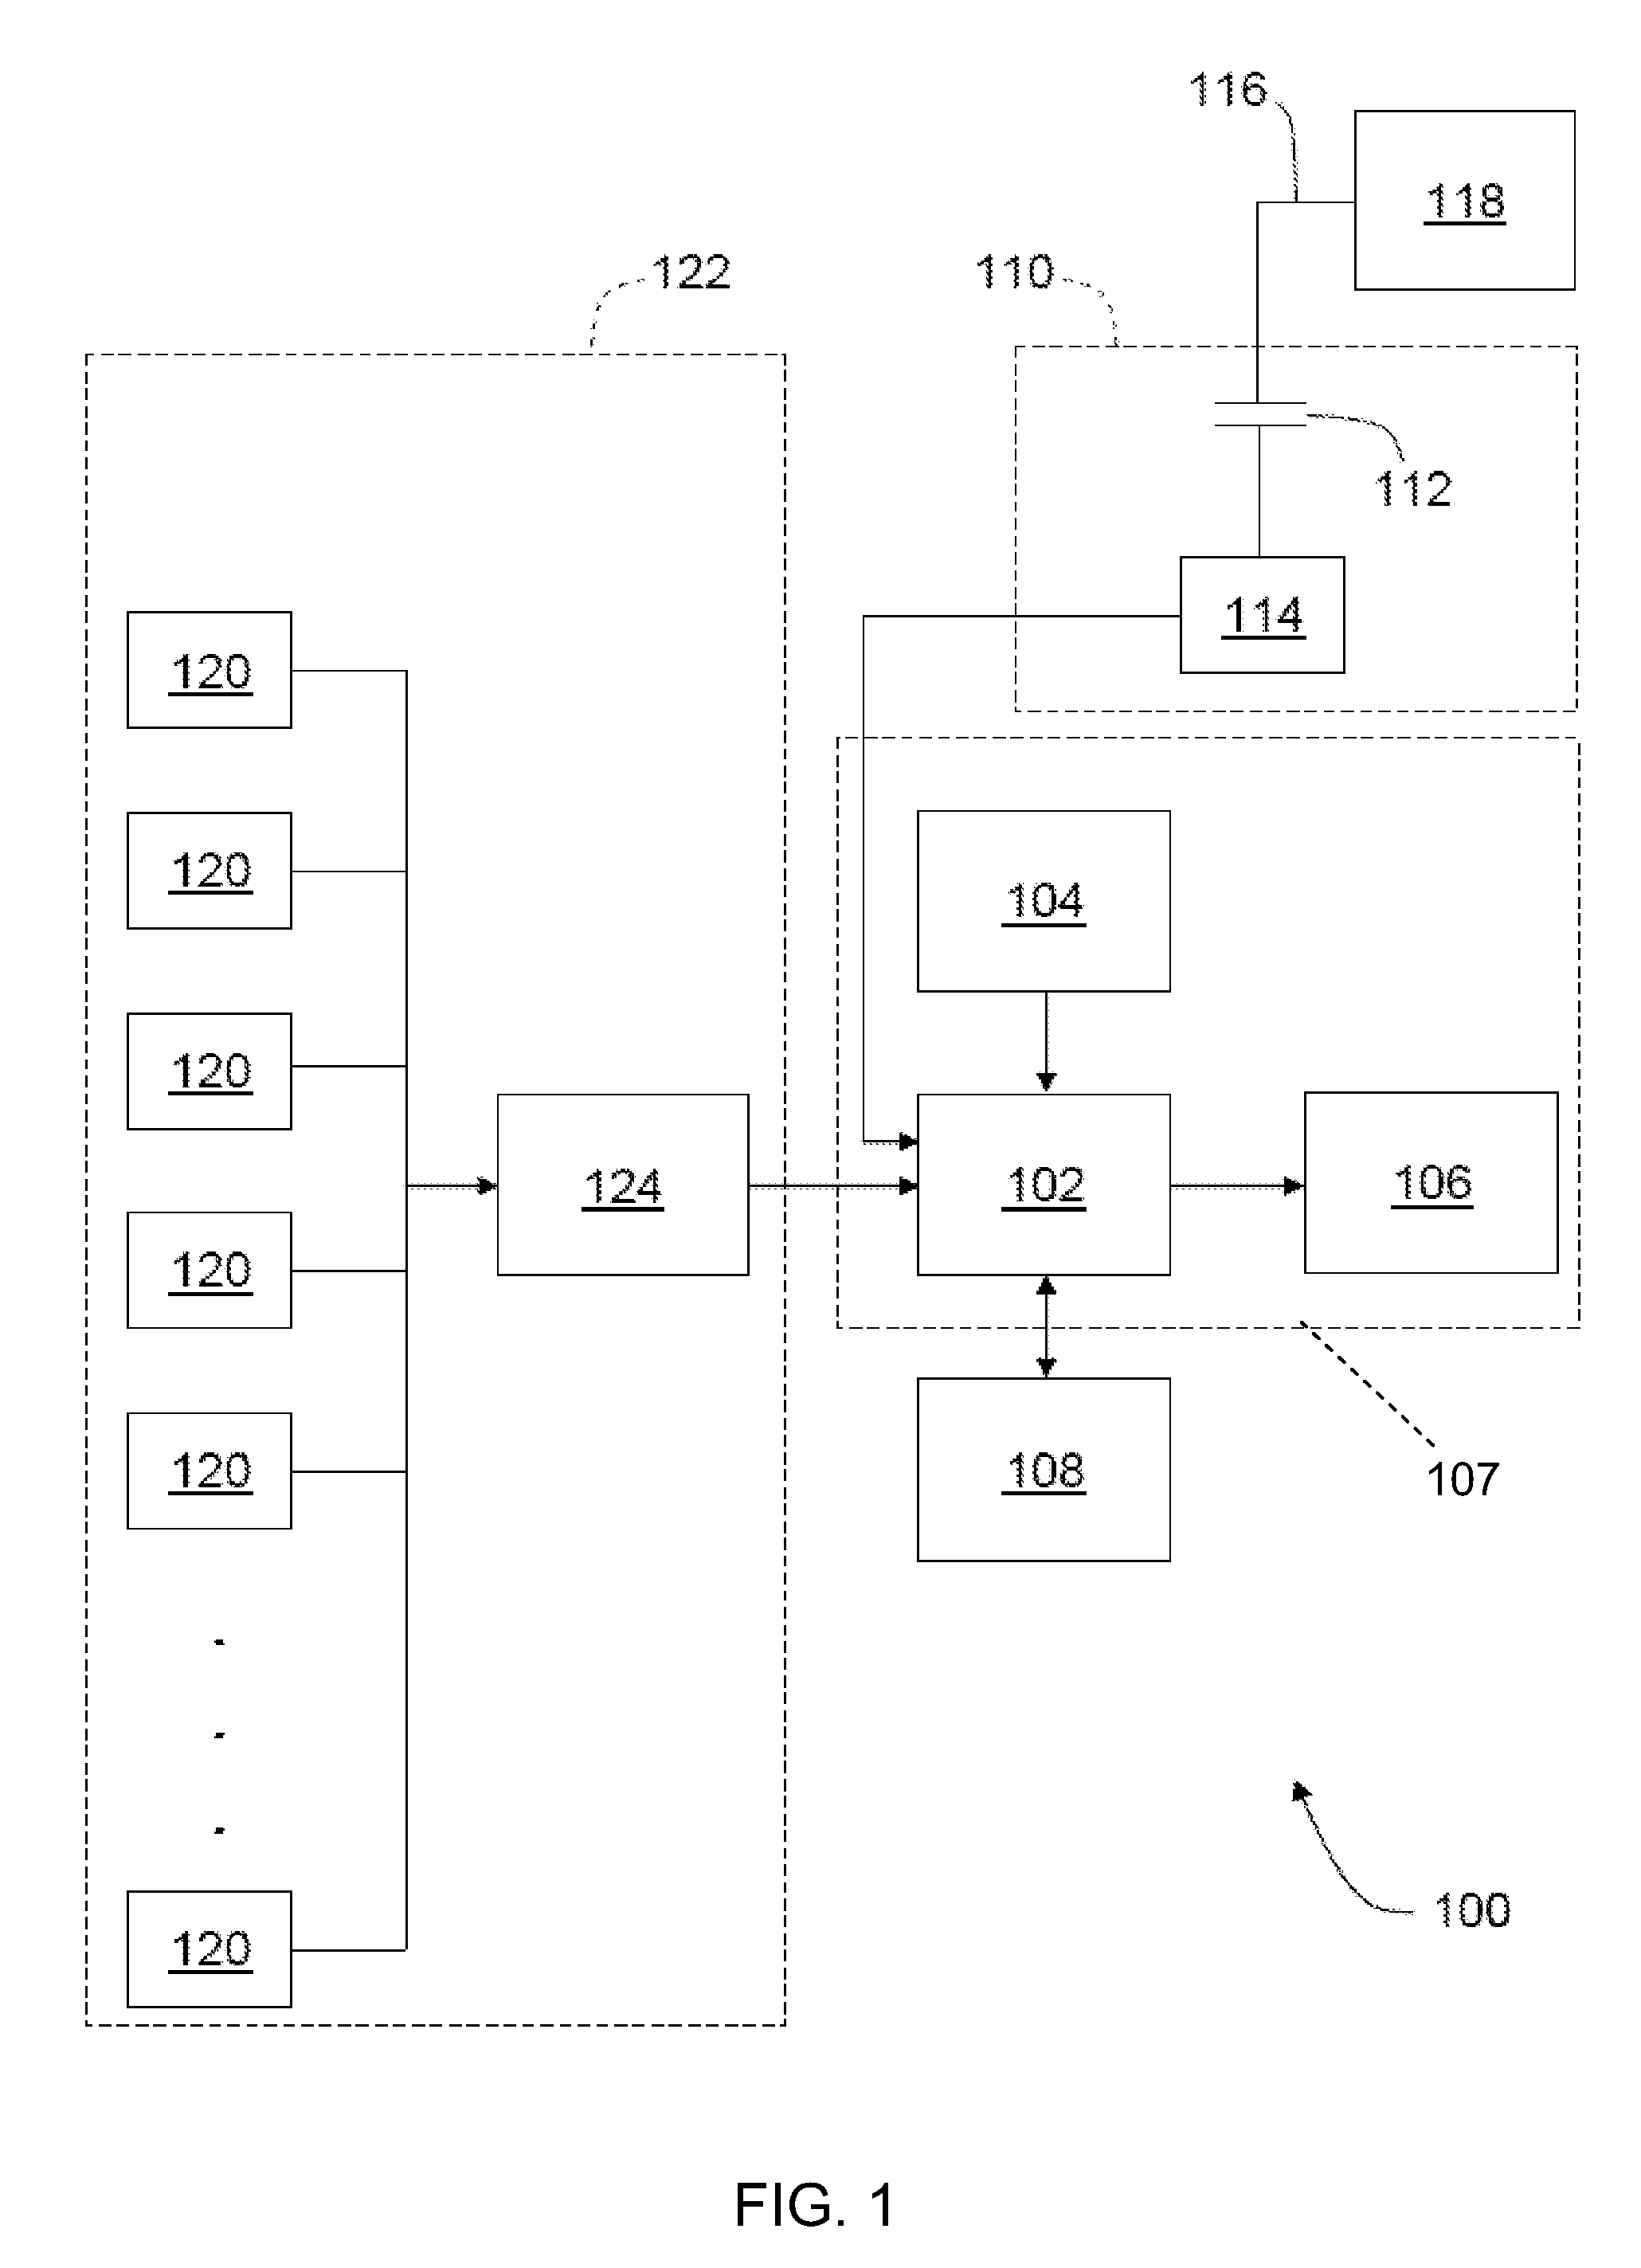 Method and apparatus for analyzing partial discharges in electrical devices